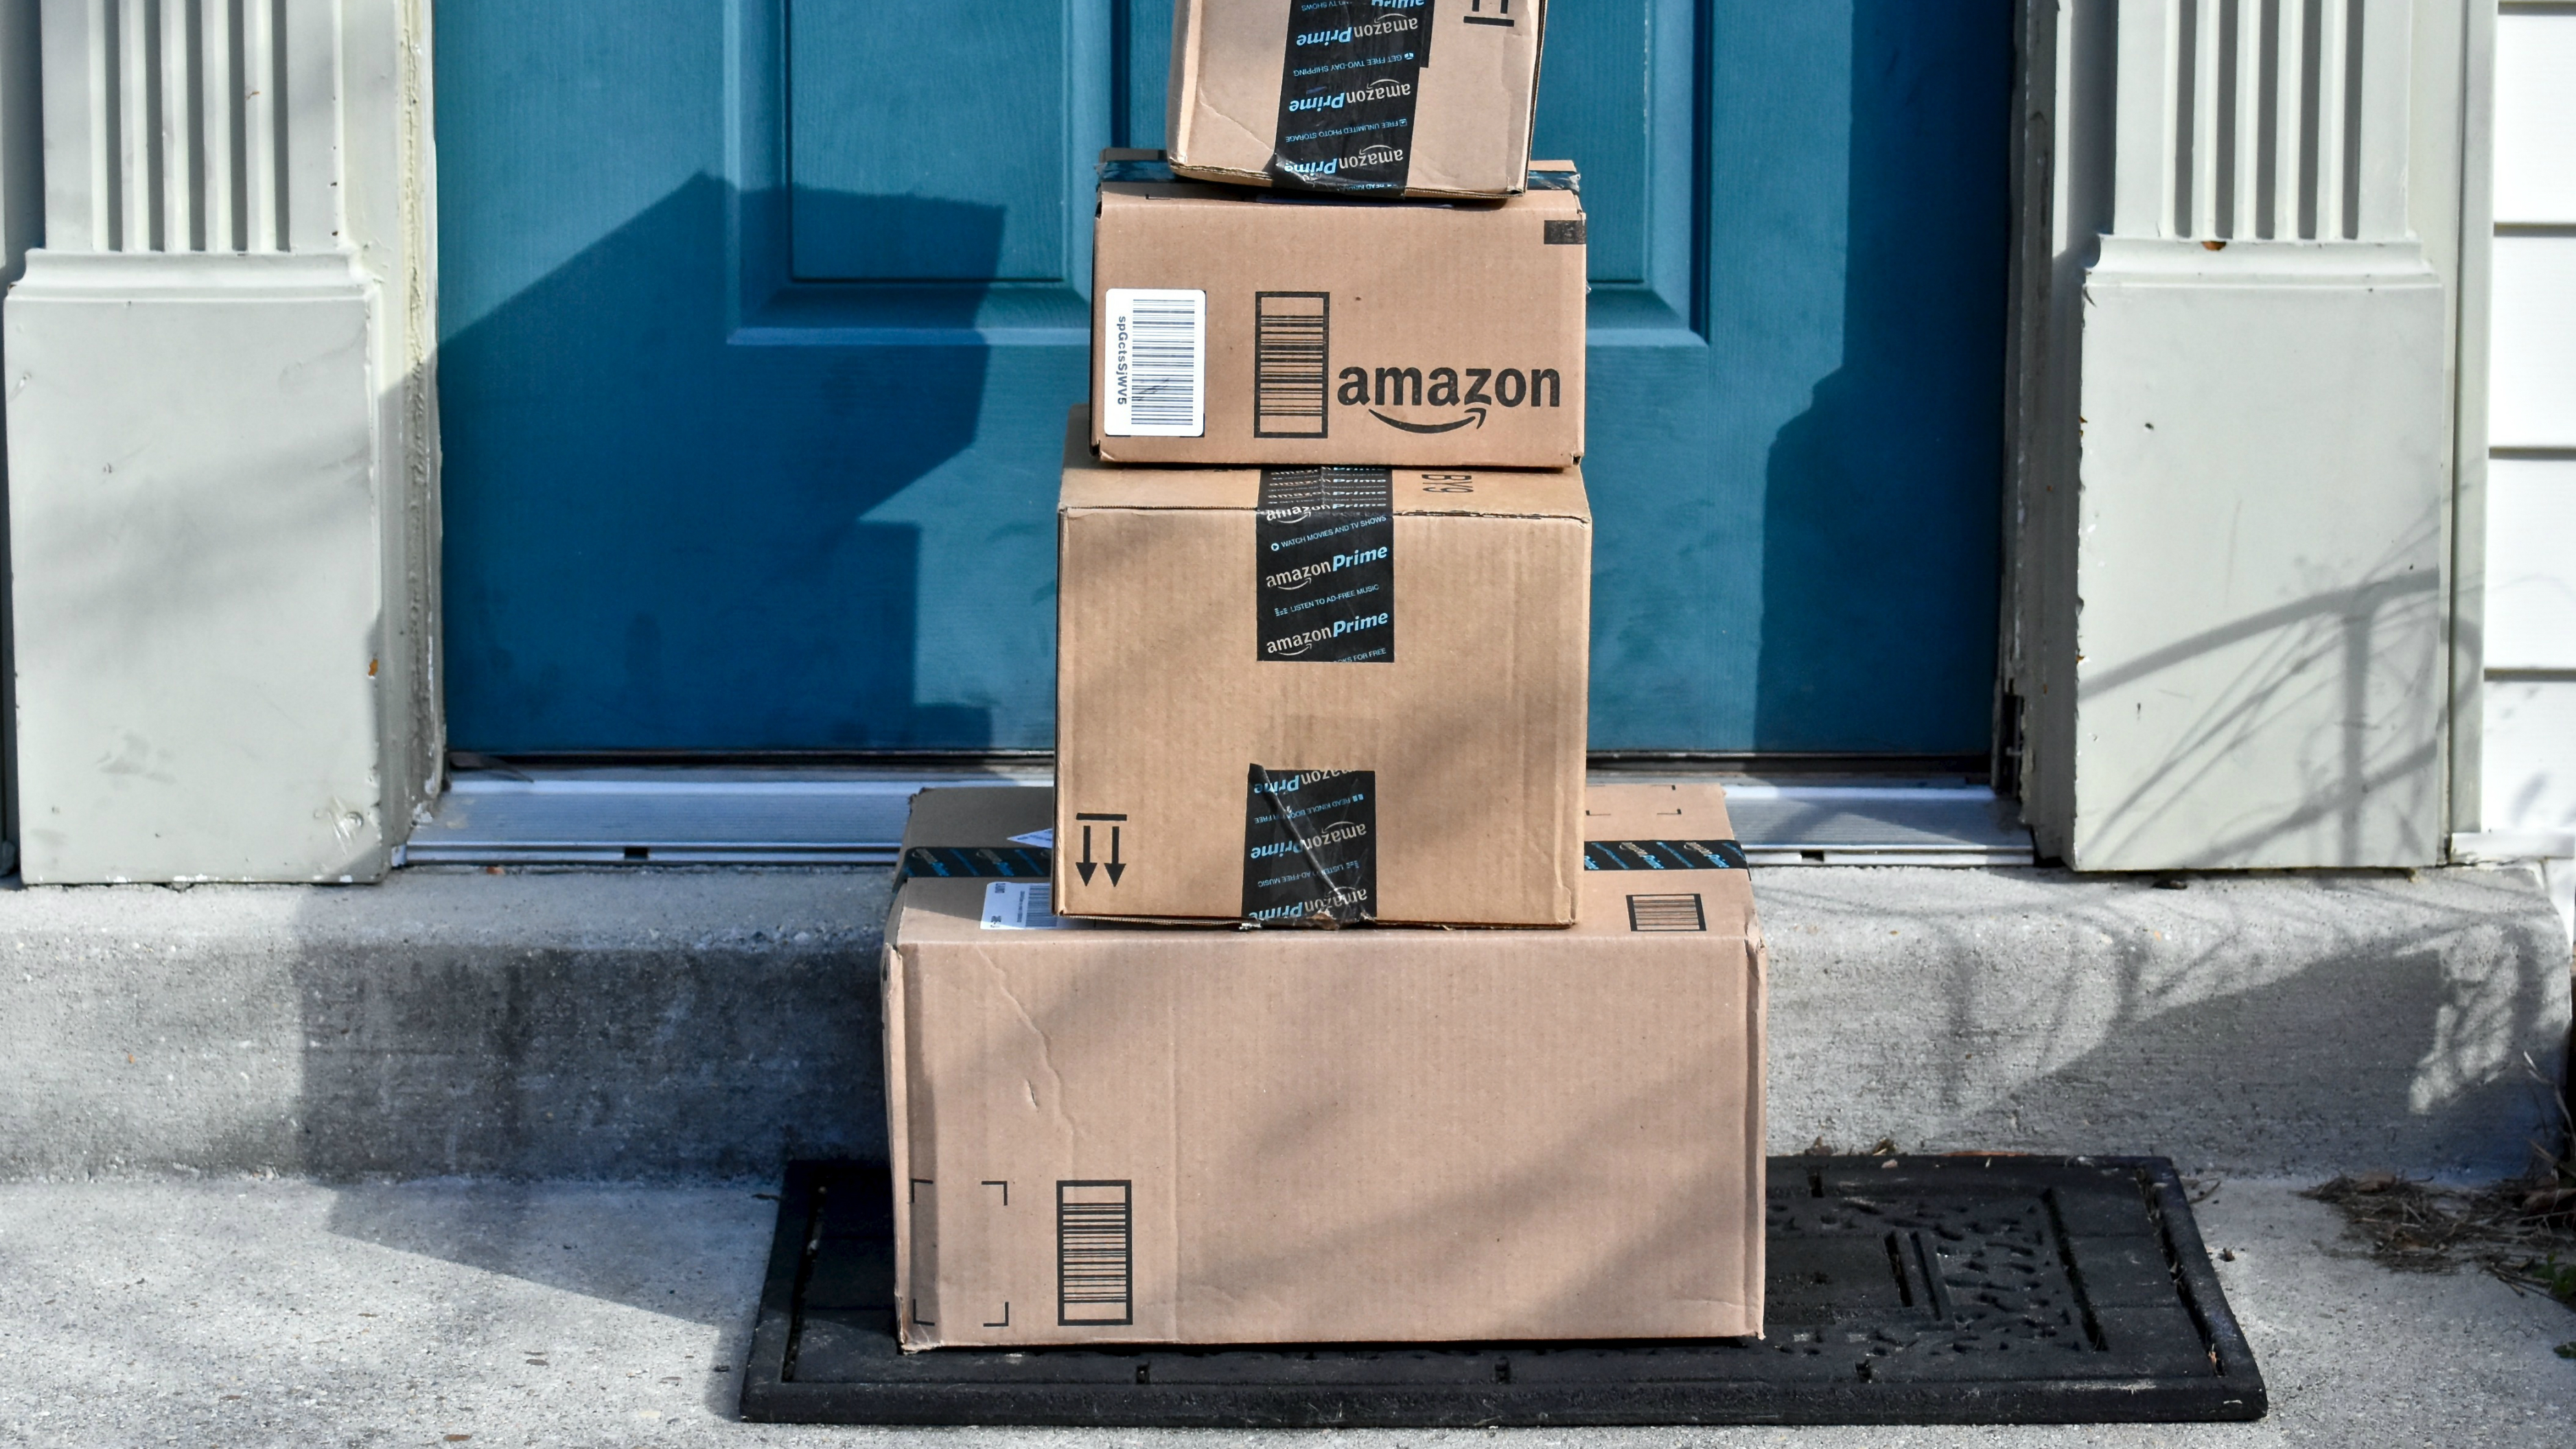 Next day Amazon Prime delivery withdrawn for some non-essential products